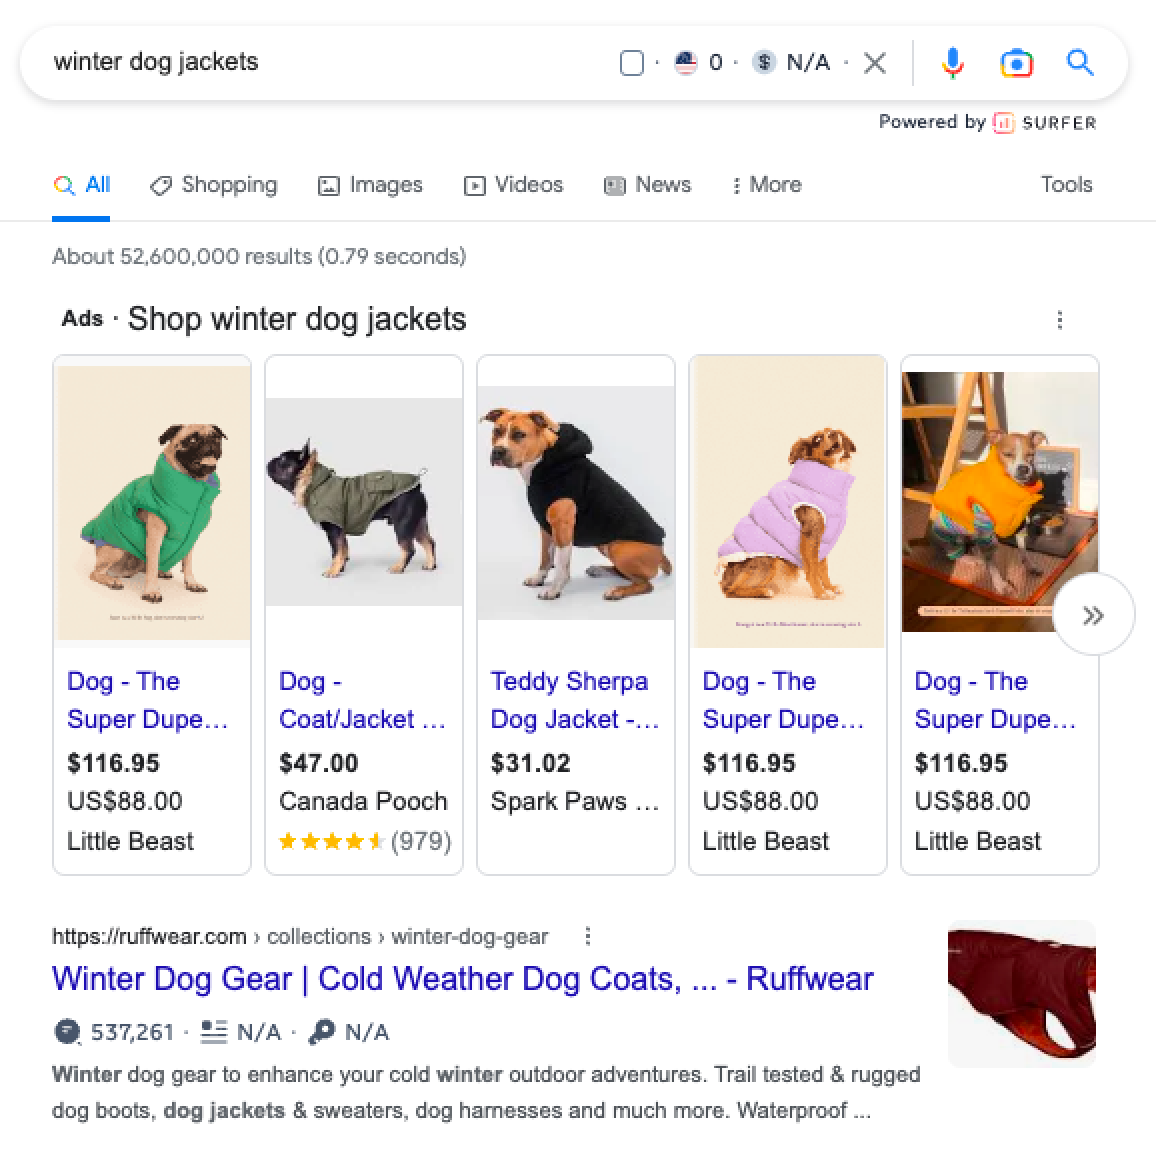 A screenshot of the Google search results for winter dog jackets, showing how roughwear appears with a dedicated collection page targeting this search query